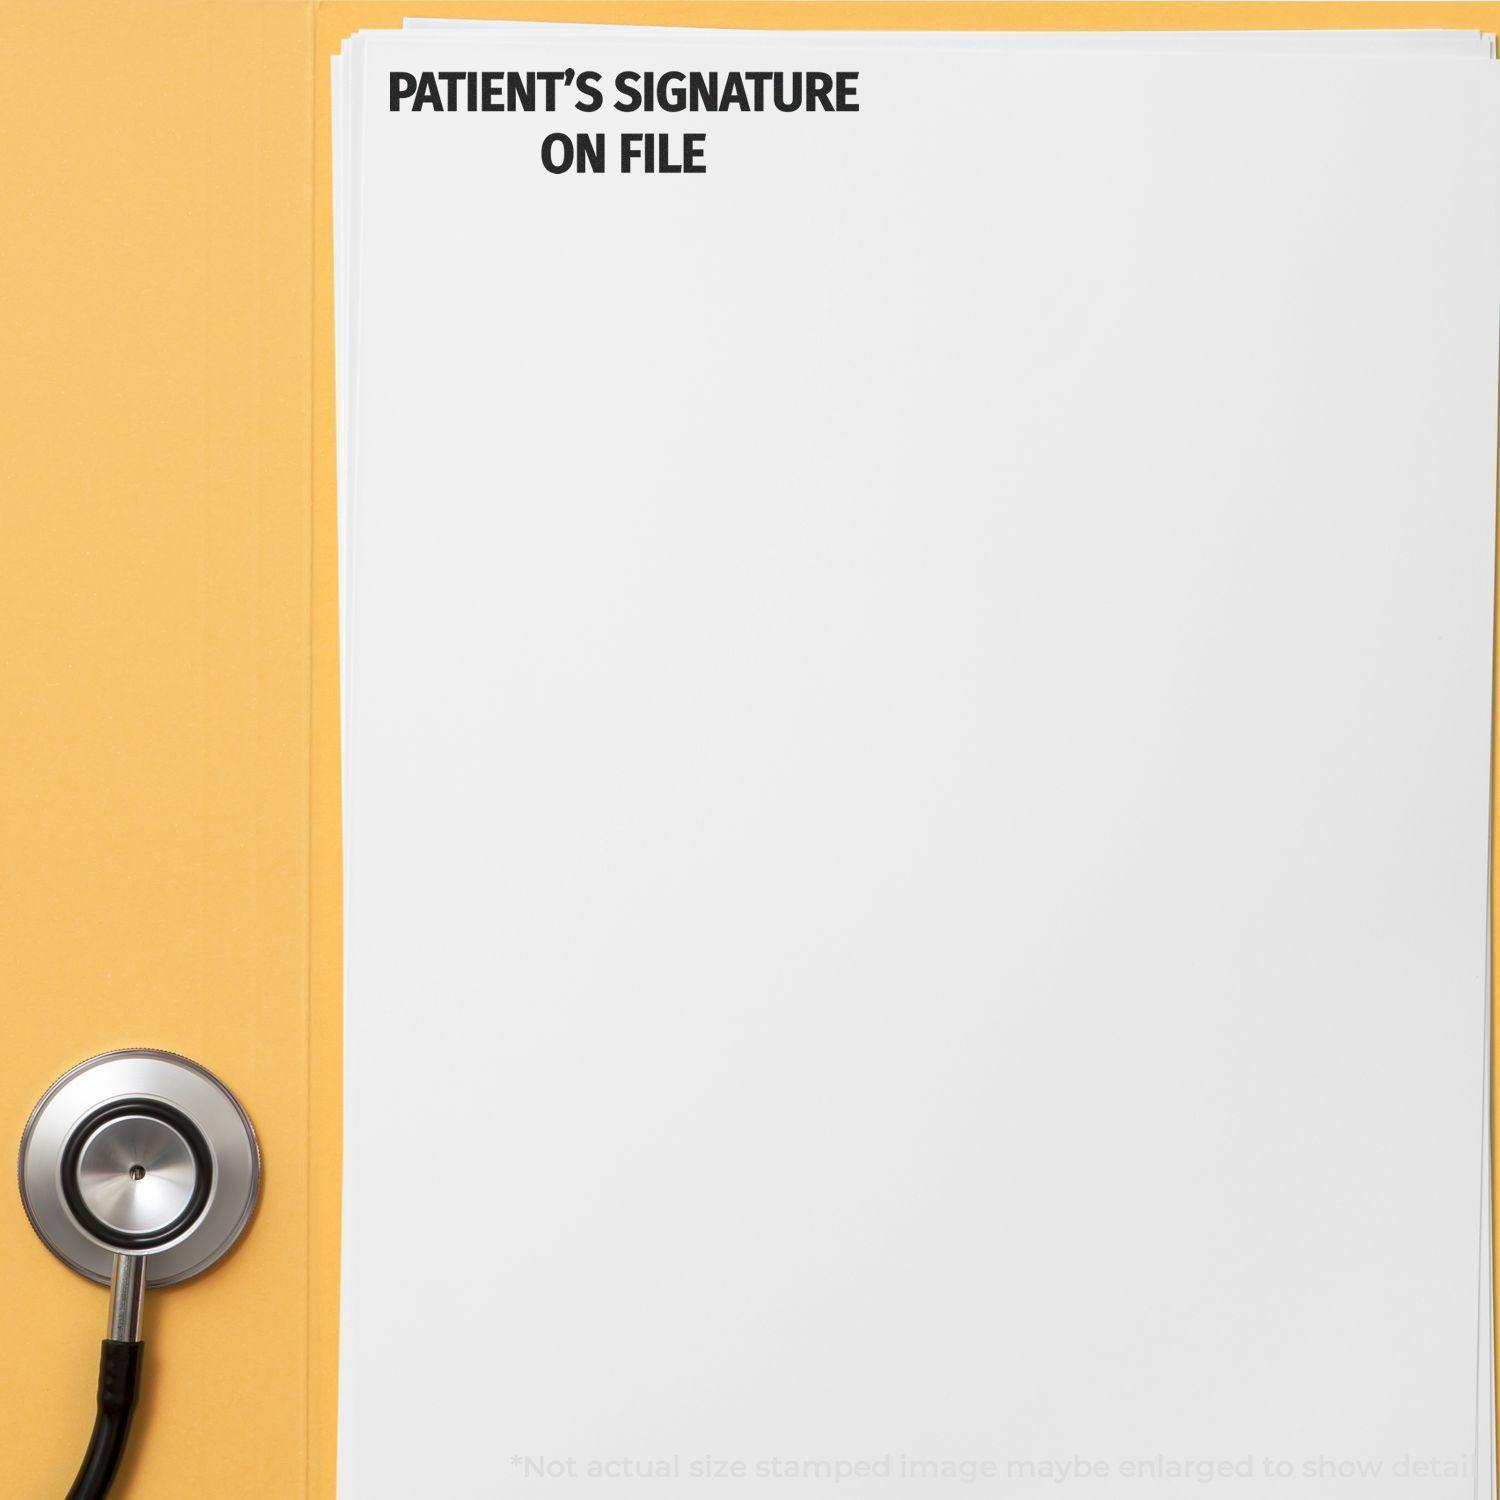 A stock office rubber stamp with a stamped image showing how the text "PATIENT'S SIGNATURE ON FILE" in a large font is displayed after stamping.